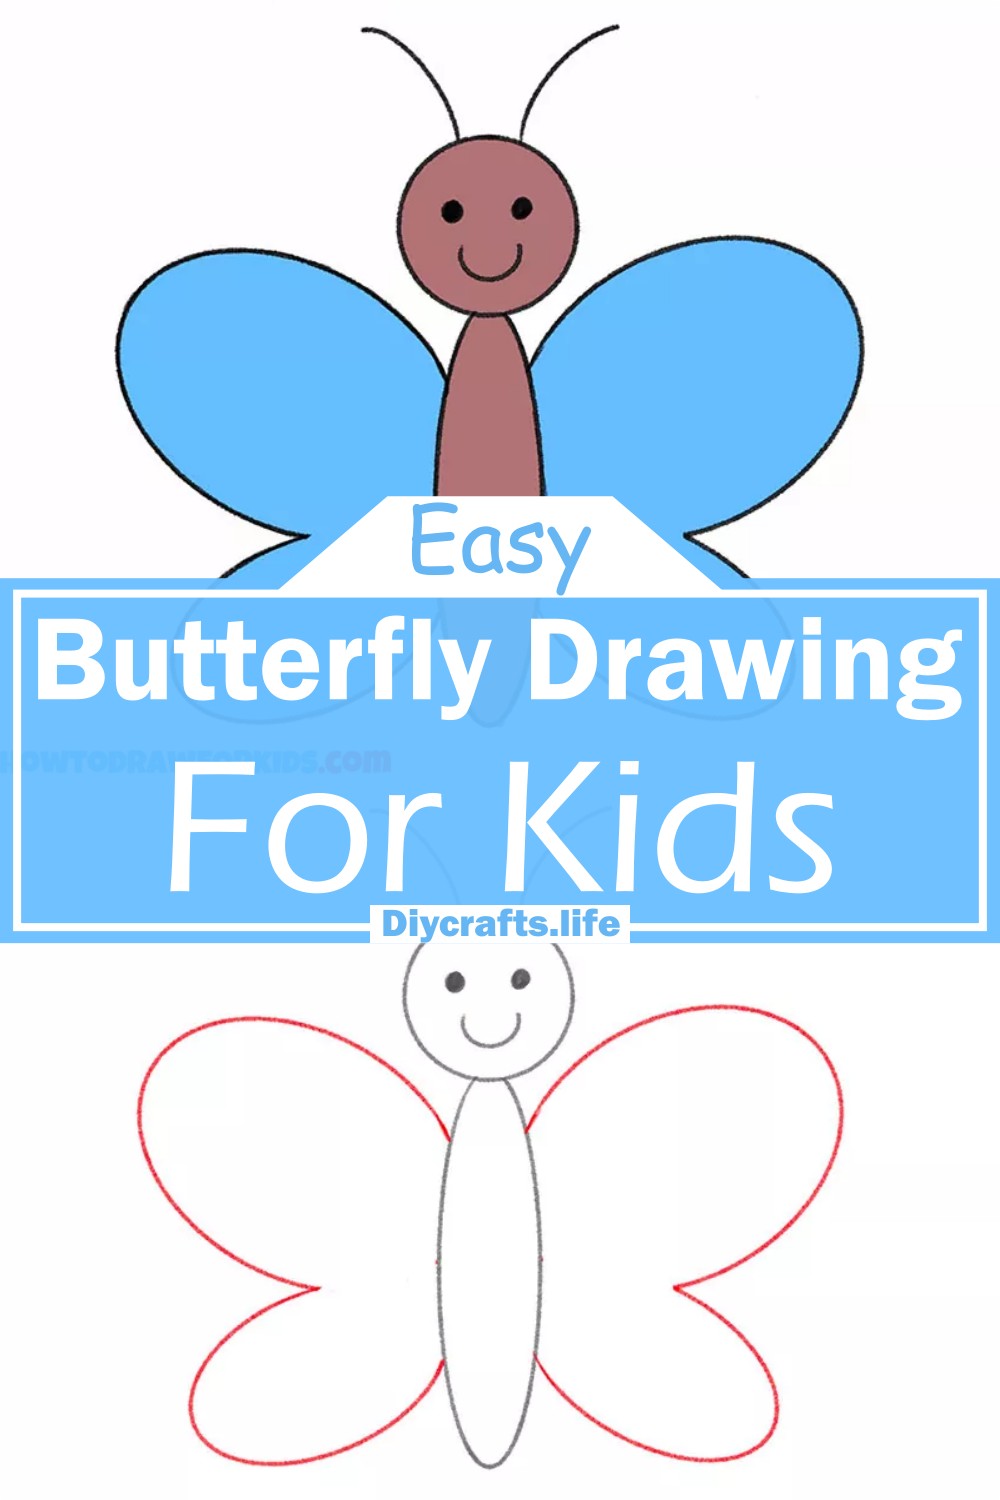 Butterfly Drawing | Easy drawing for kids - YouTube-saigonsouth.com.vn